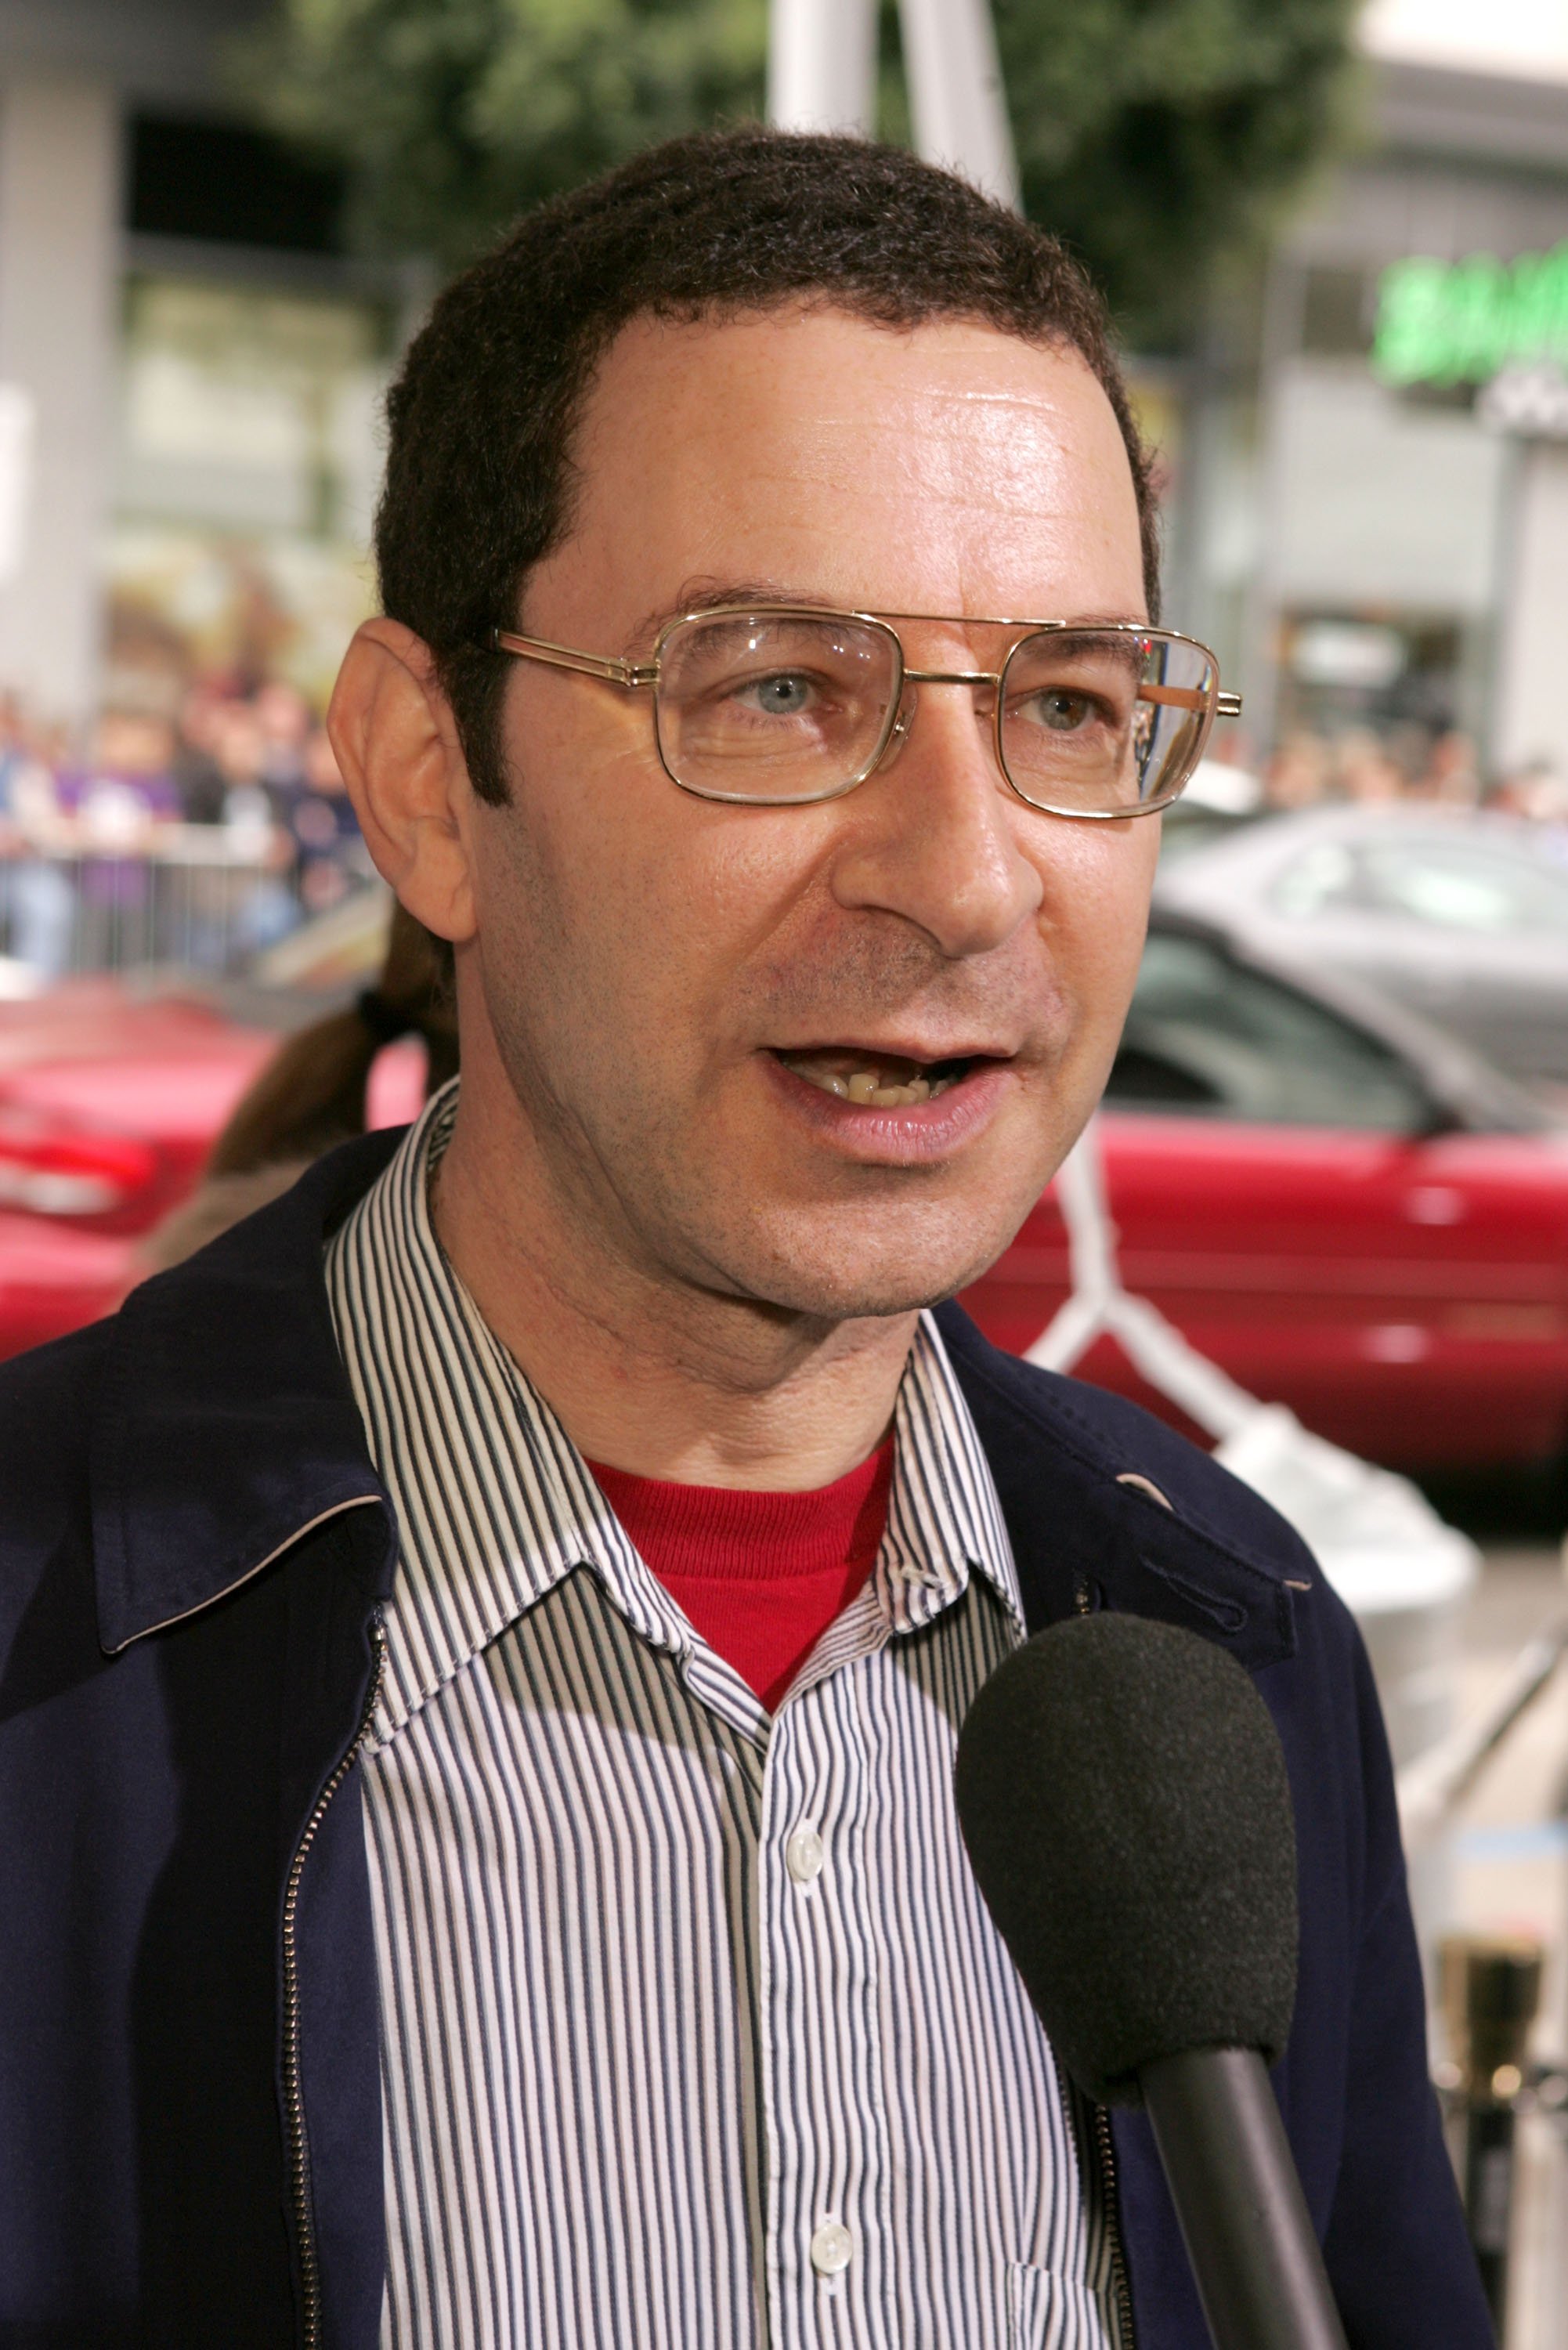 Eddie Deezen at the Grauman's Chinese Theatre on November 7, 2004 in Hollywood, California | Source: Getty Images